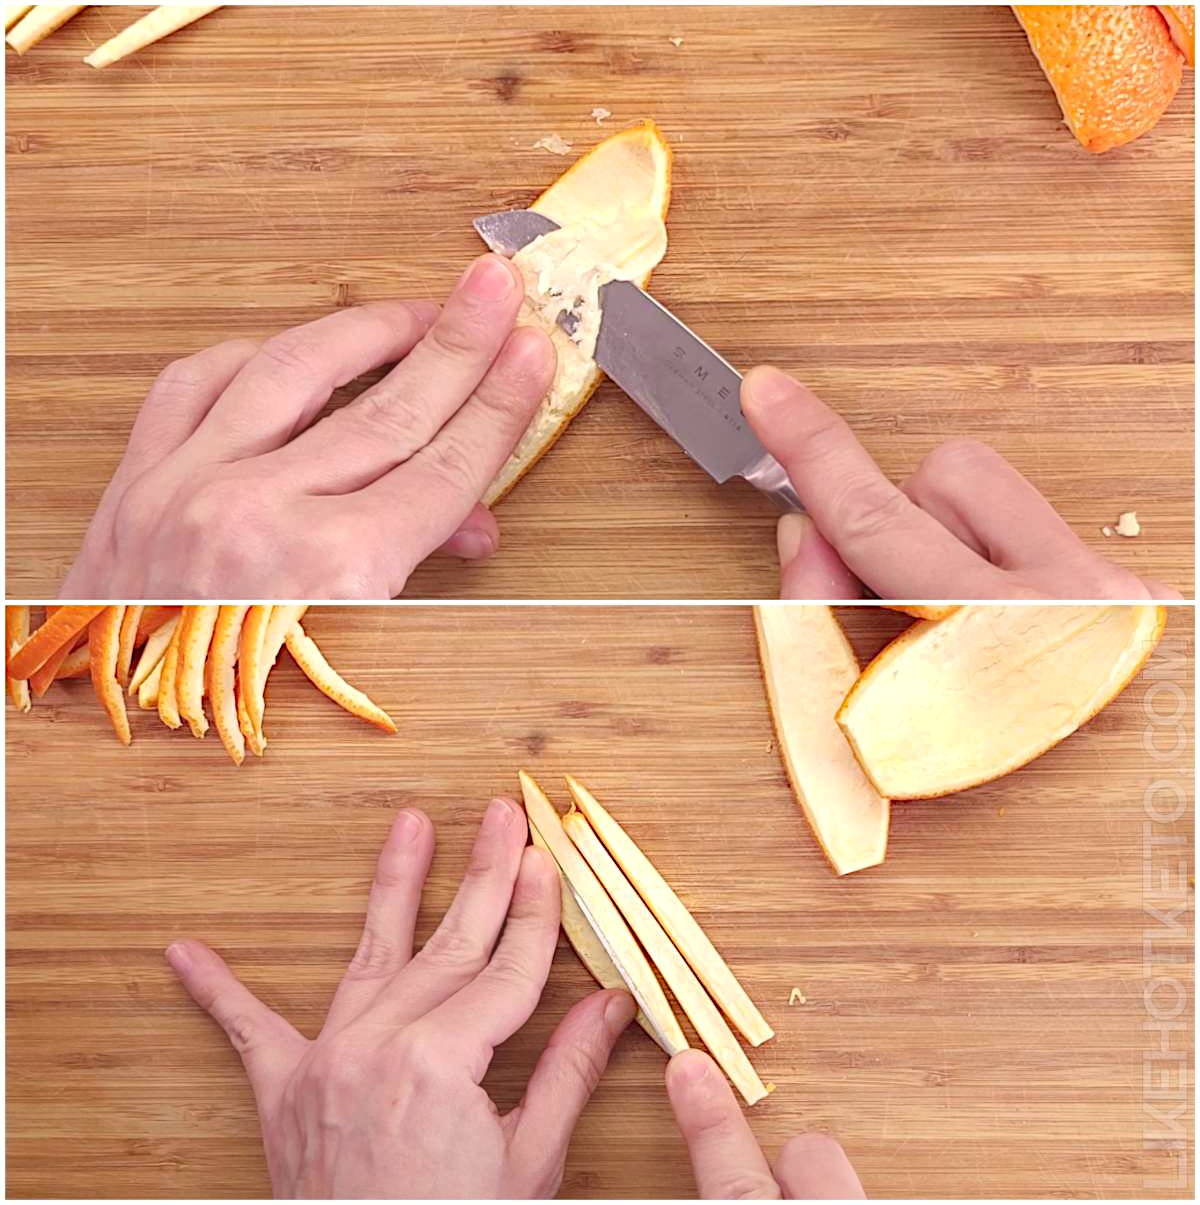 Cutting the orange peels into slices and removing the excess pith.